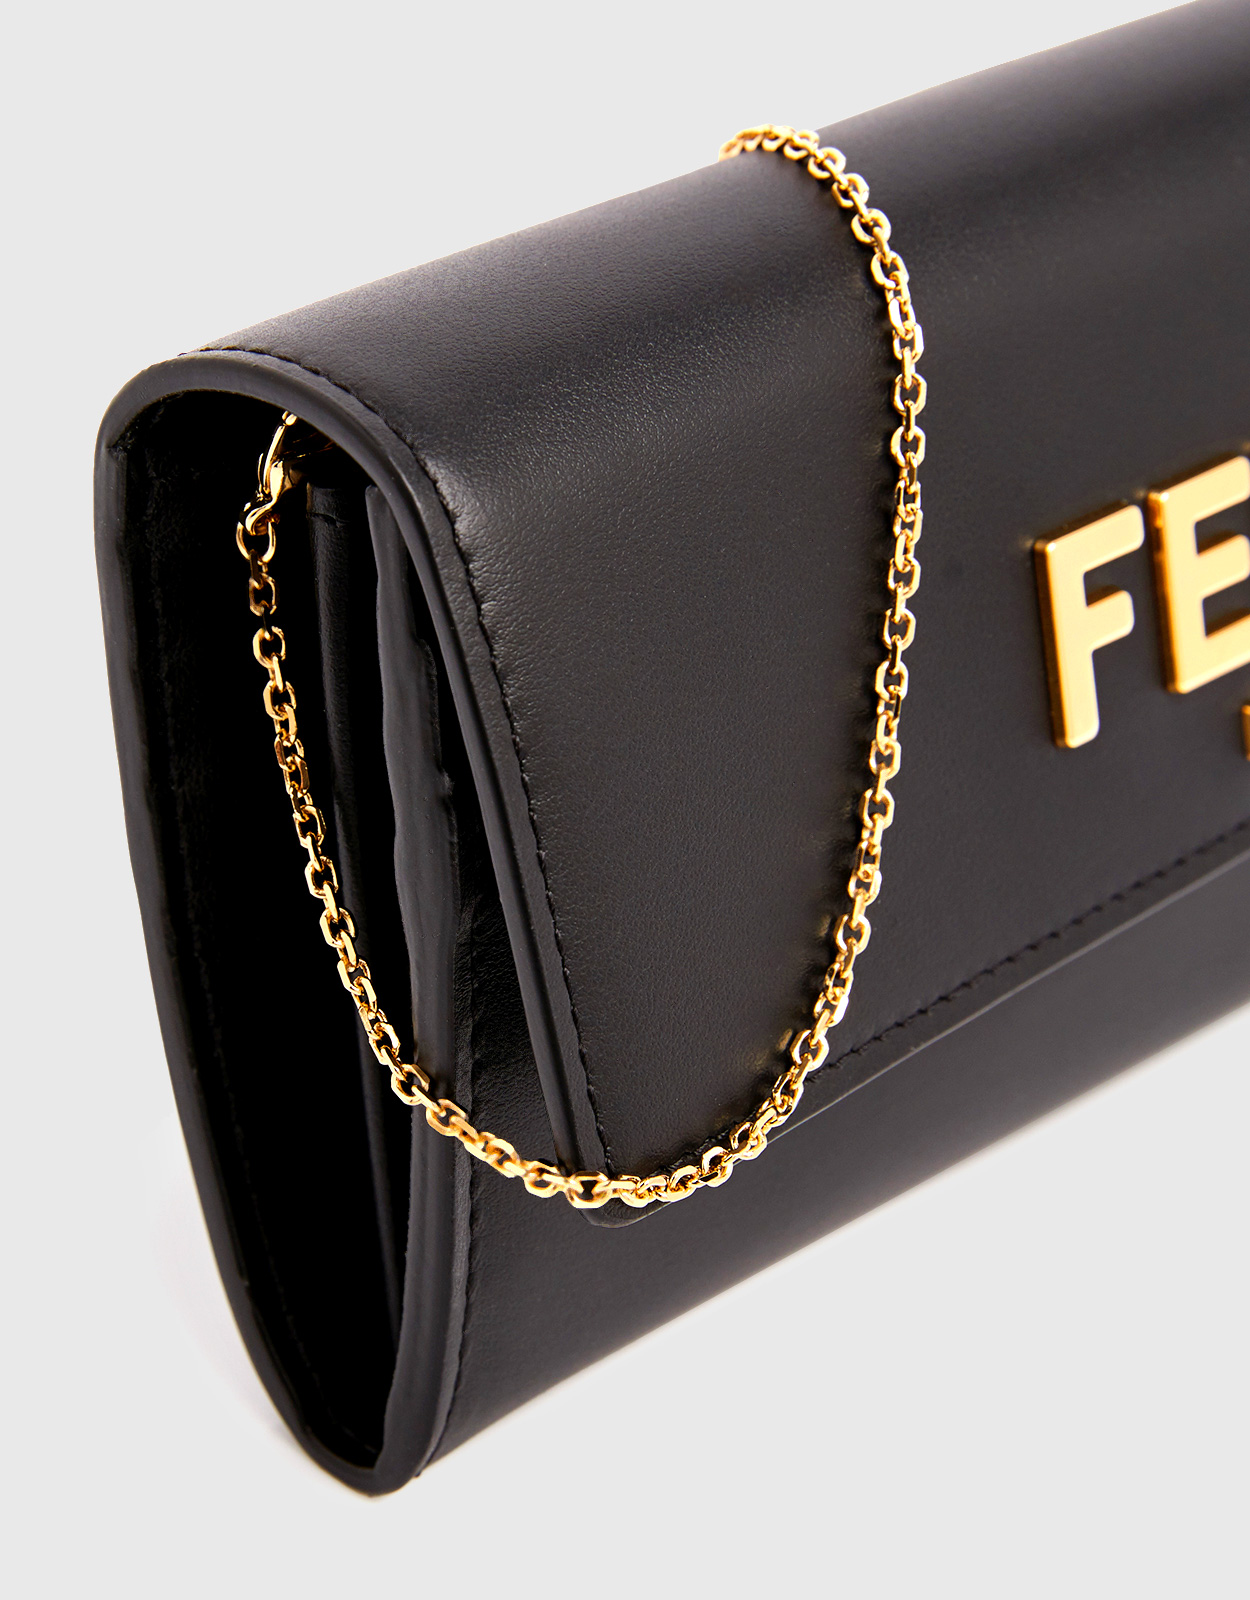 Fendi Wallet On Chain With Pouches Mini Leather In Black - Praise To Heaven